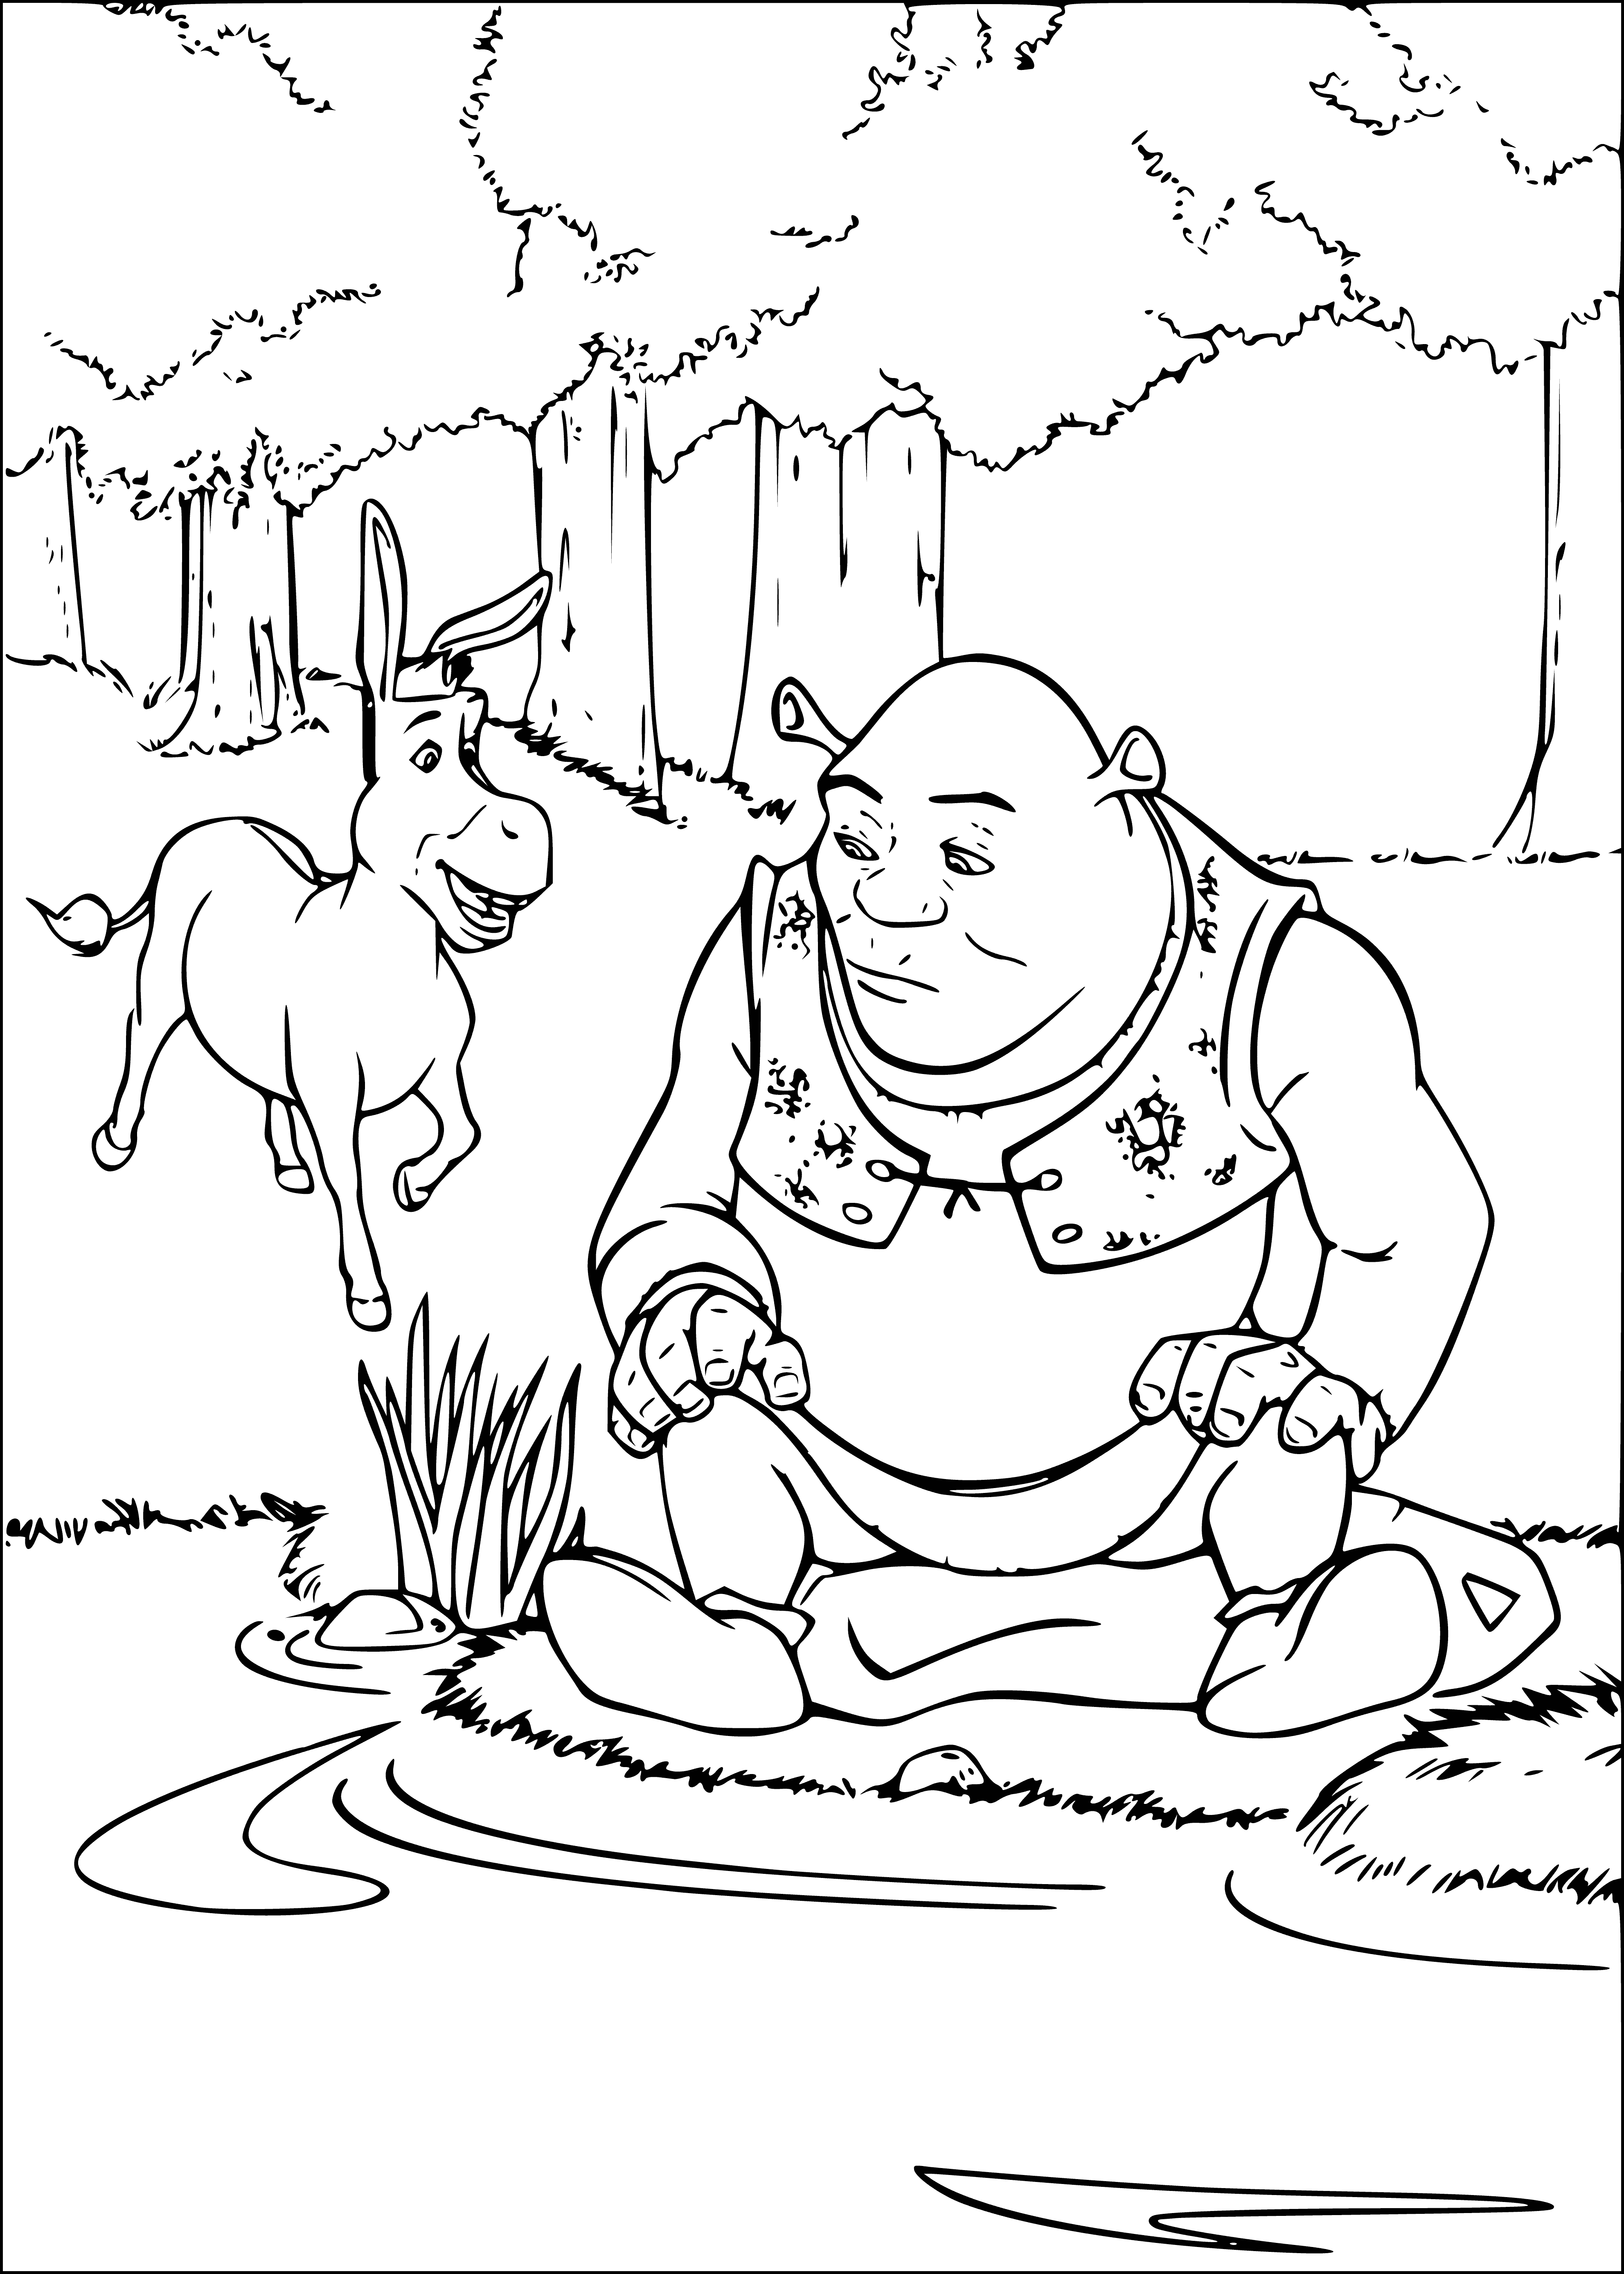 coloring page: Shrek is a large, muscular, green Cartoon Hero who is very brave & unafraid.